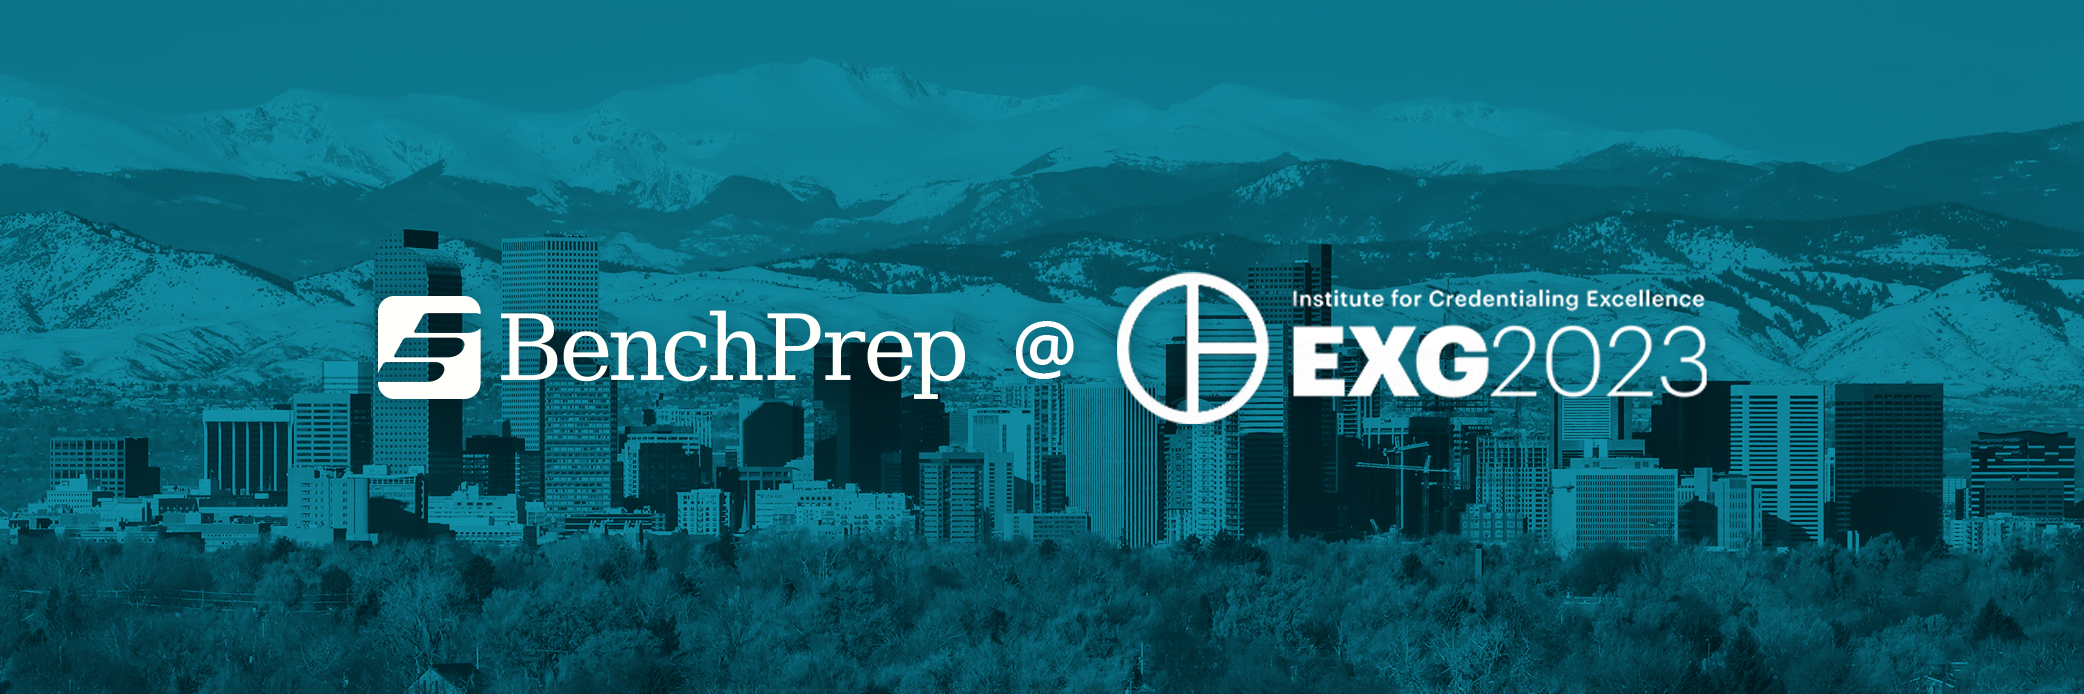 BenchPrep Will Be in Booth #219 at the 2023 I.C.E. Exchange in Colorado Springs, Colorado